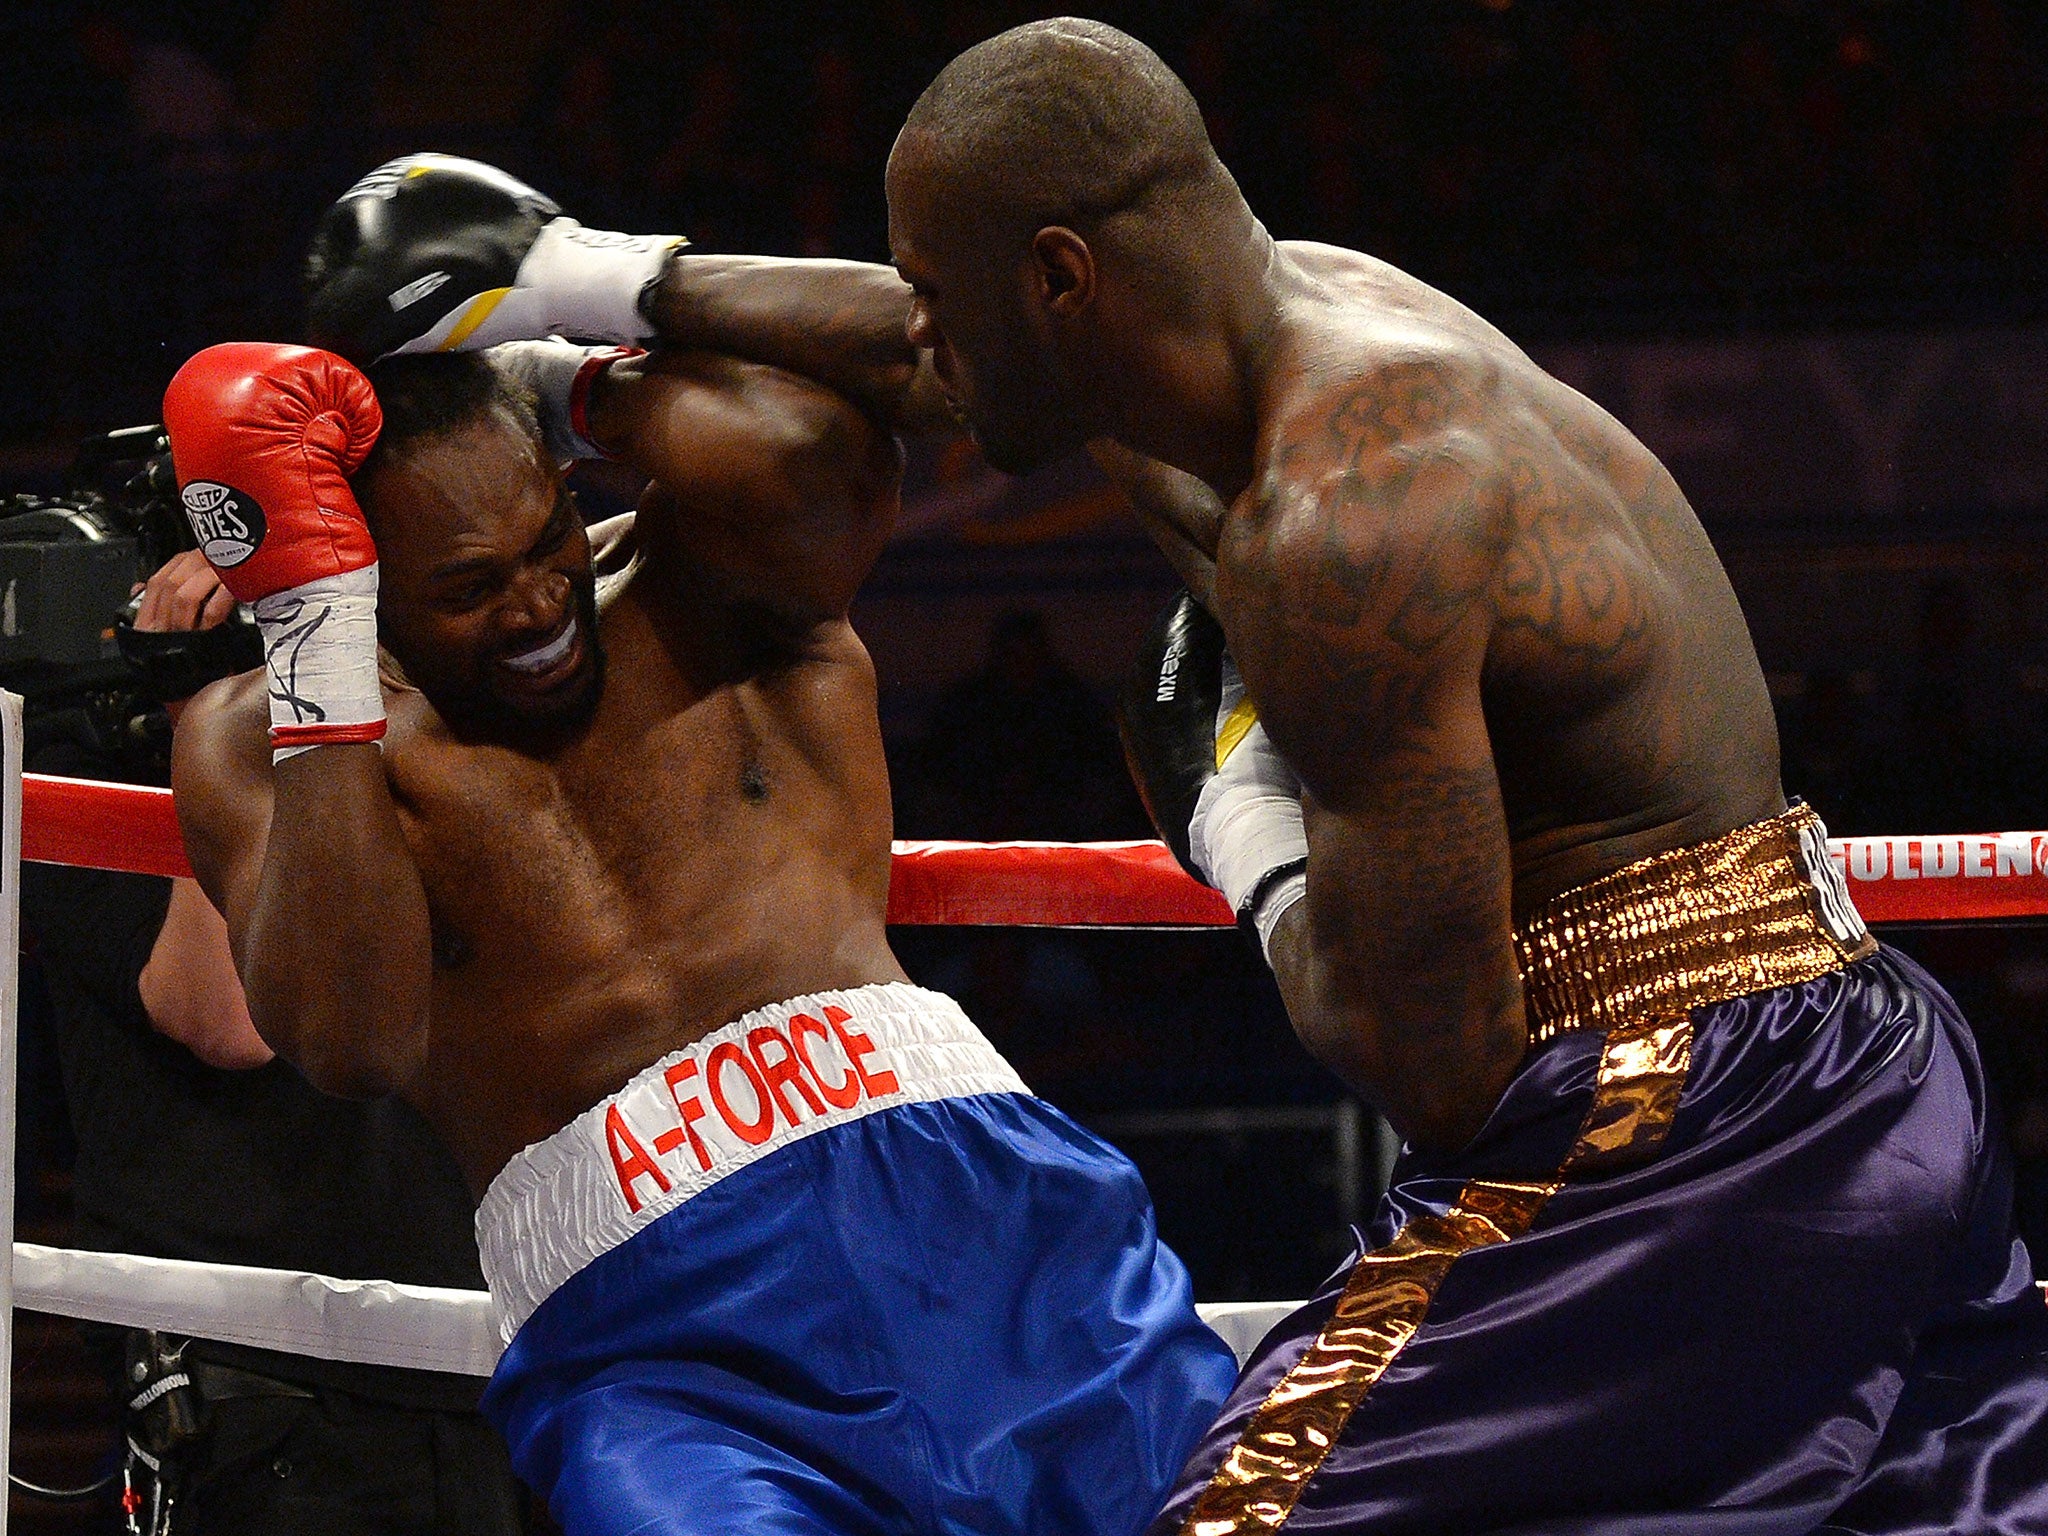 Audley Harrison was on the end of a brutal knockout defeat by Deontay Wilder five years ago